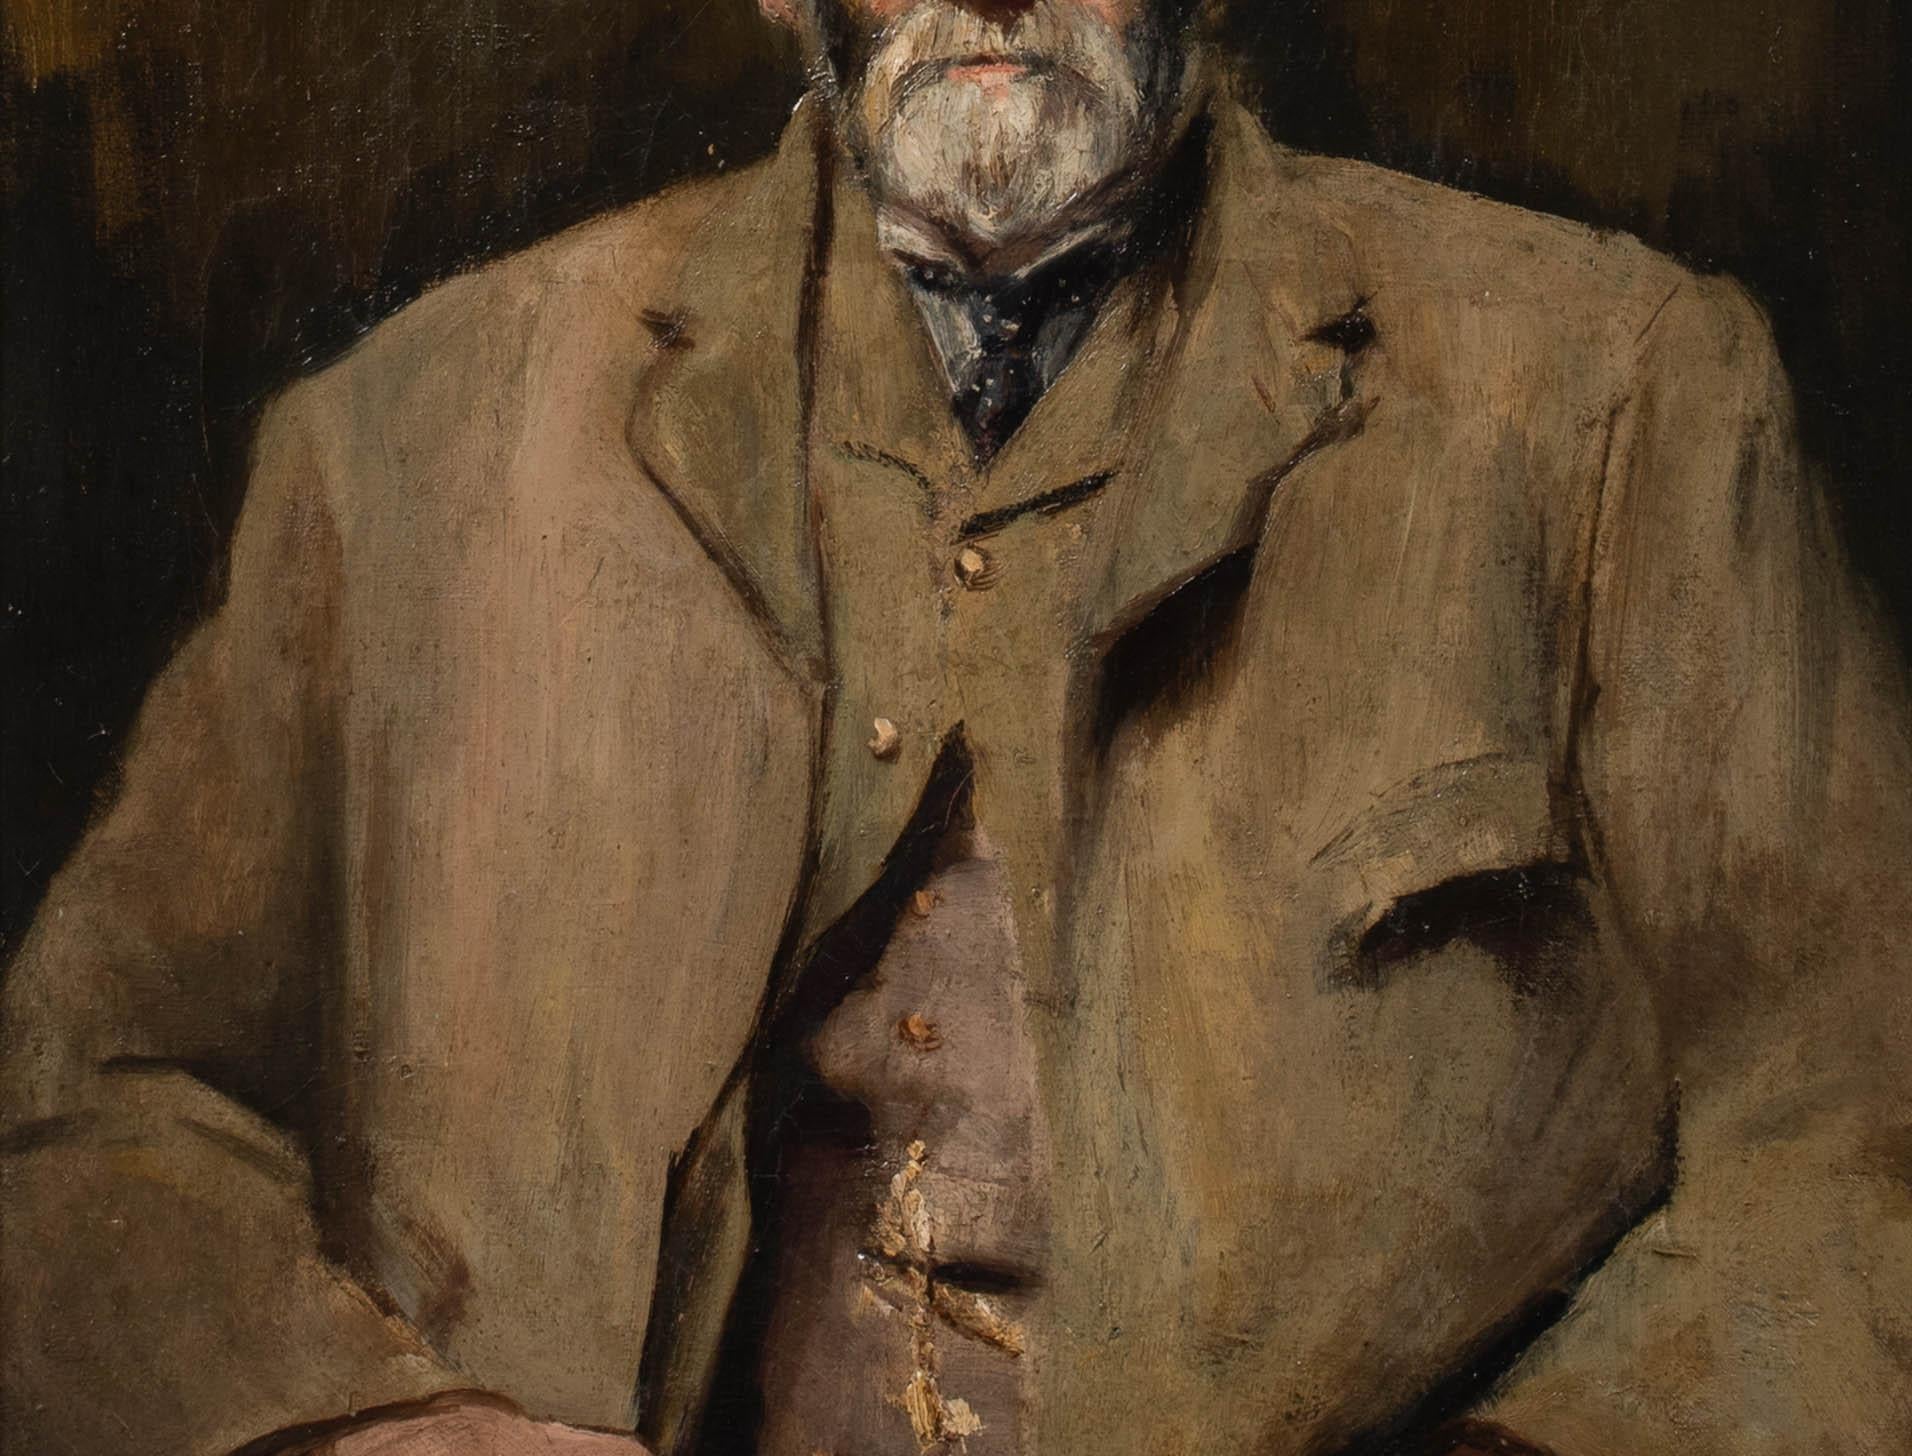 Portrait Of Mr Frederick W Harris, circa 1920

circle of Sir John Lavery (1856-1941)

Early 20th Century portrait or a bearded gentleman, Mr Frederick W Harris, oil on canvas. Circa 1920 seated half length portrait of the bearded gentleman wearing a